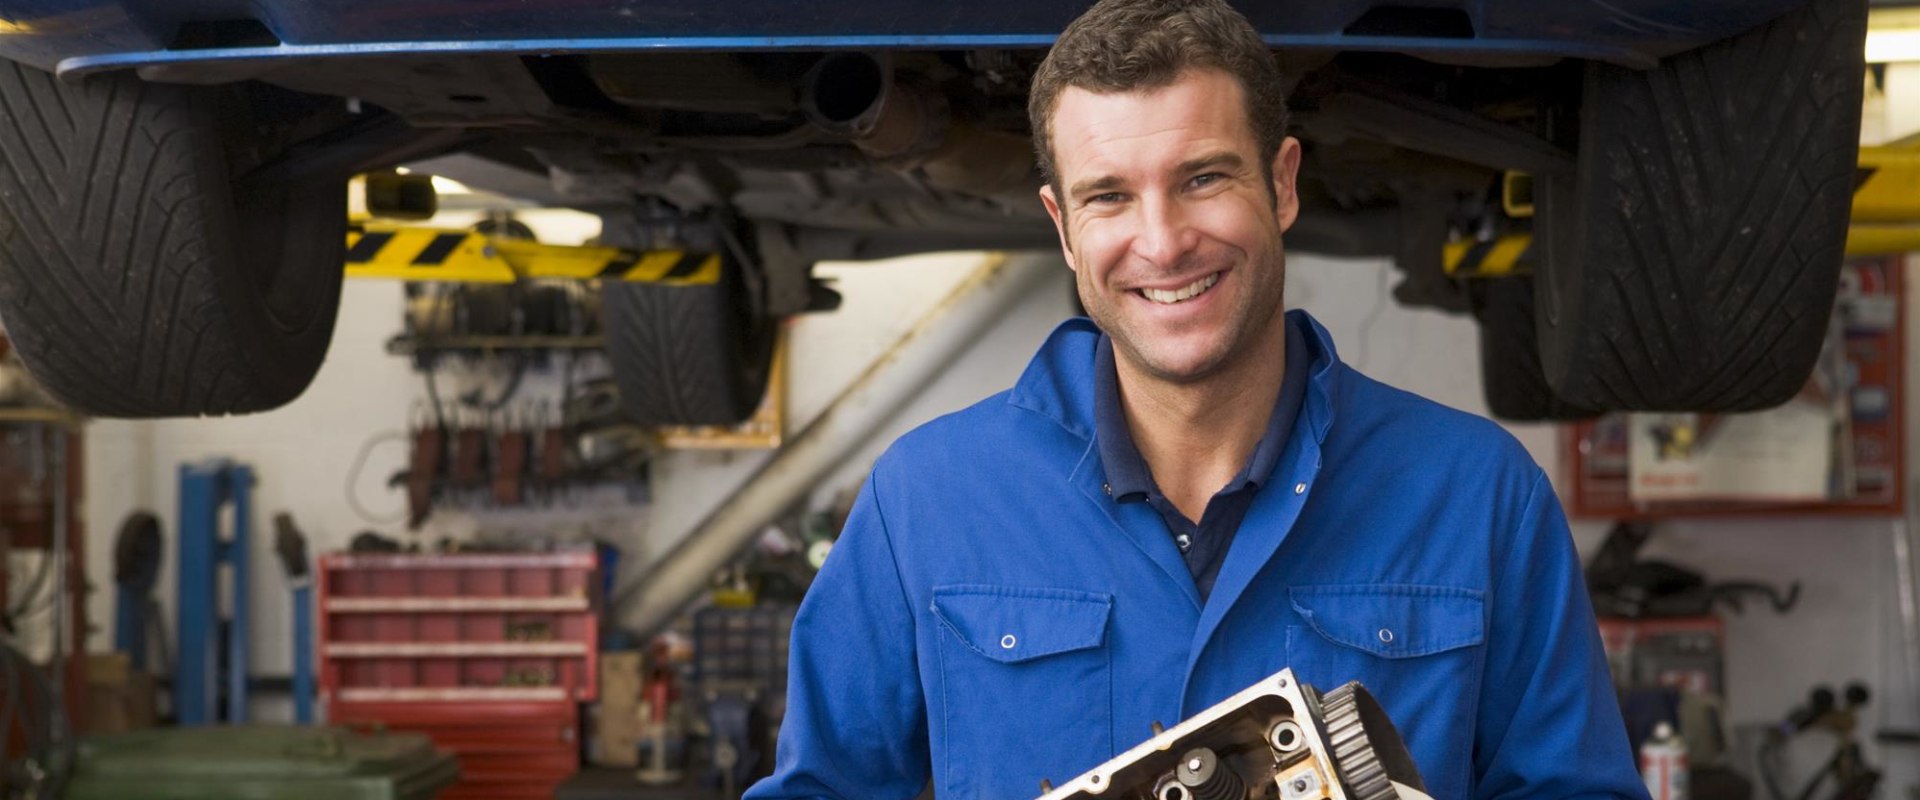 Access to Repair Shops and Mechanics: Benefits of Joining a Car Club